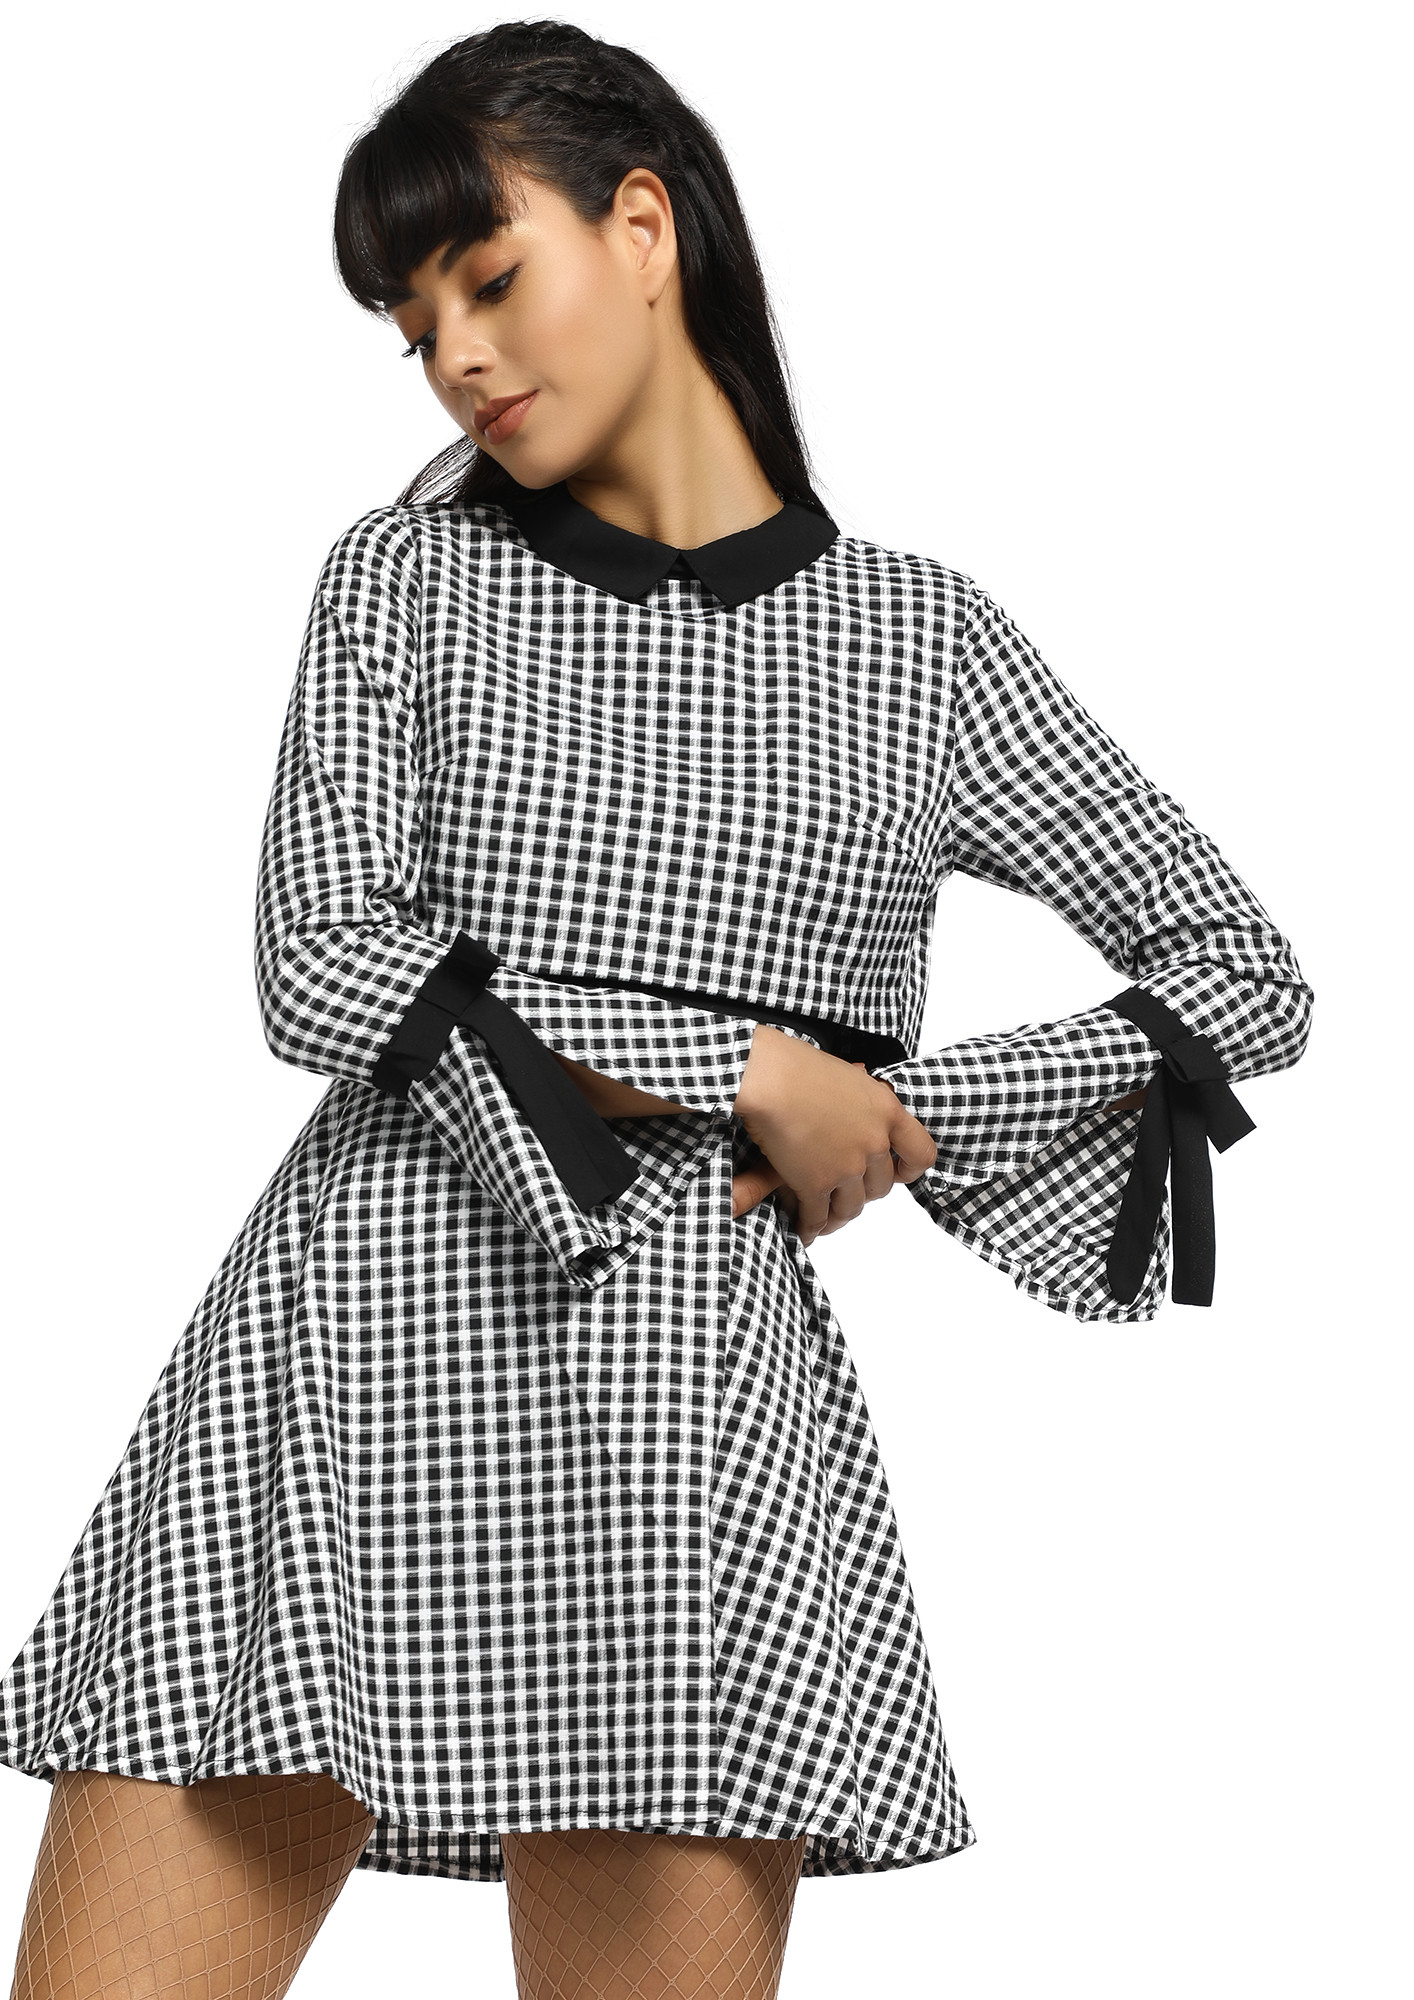 WHAT'S YOUR STYLE SCORE BLACK WHITE SKATER DRESS